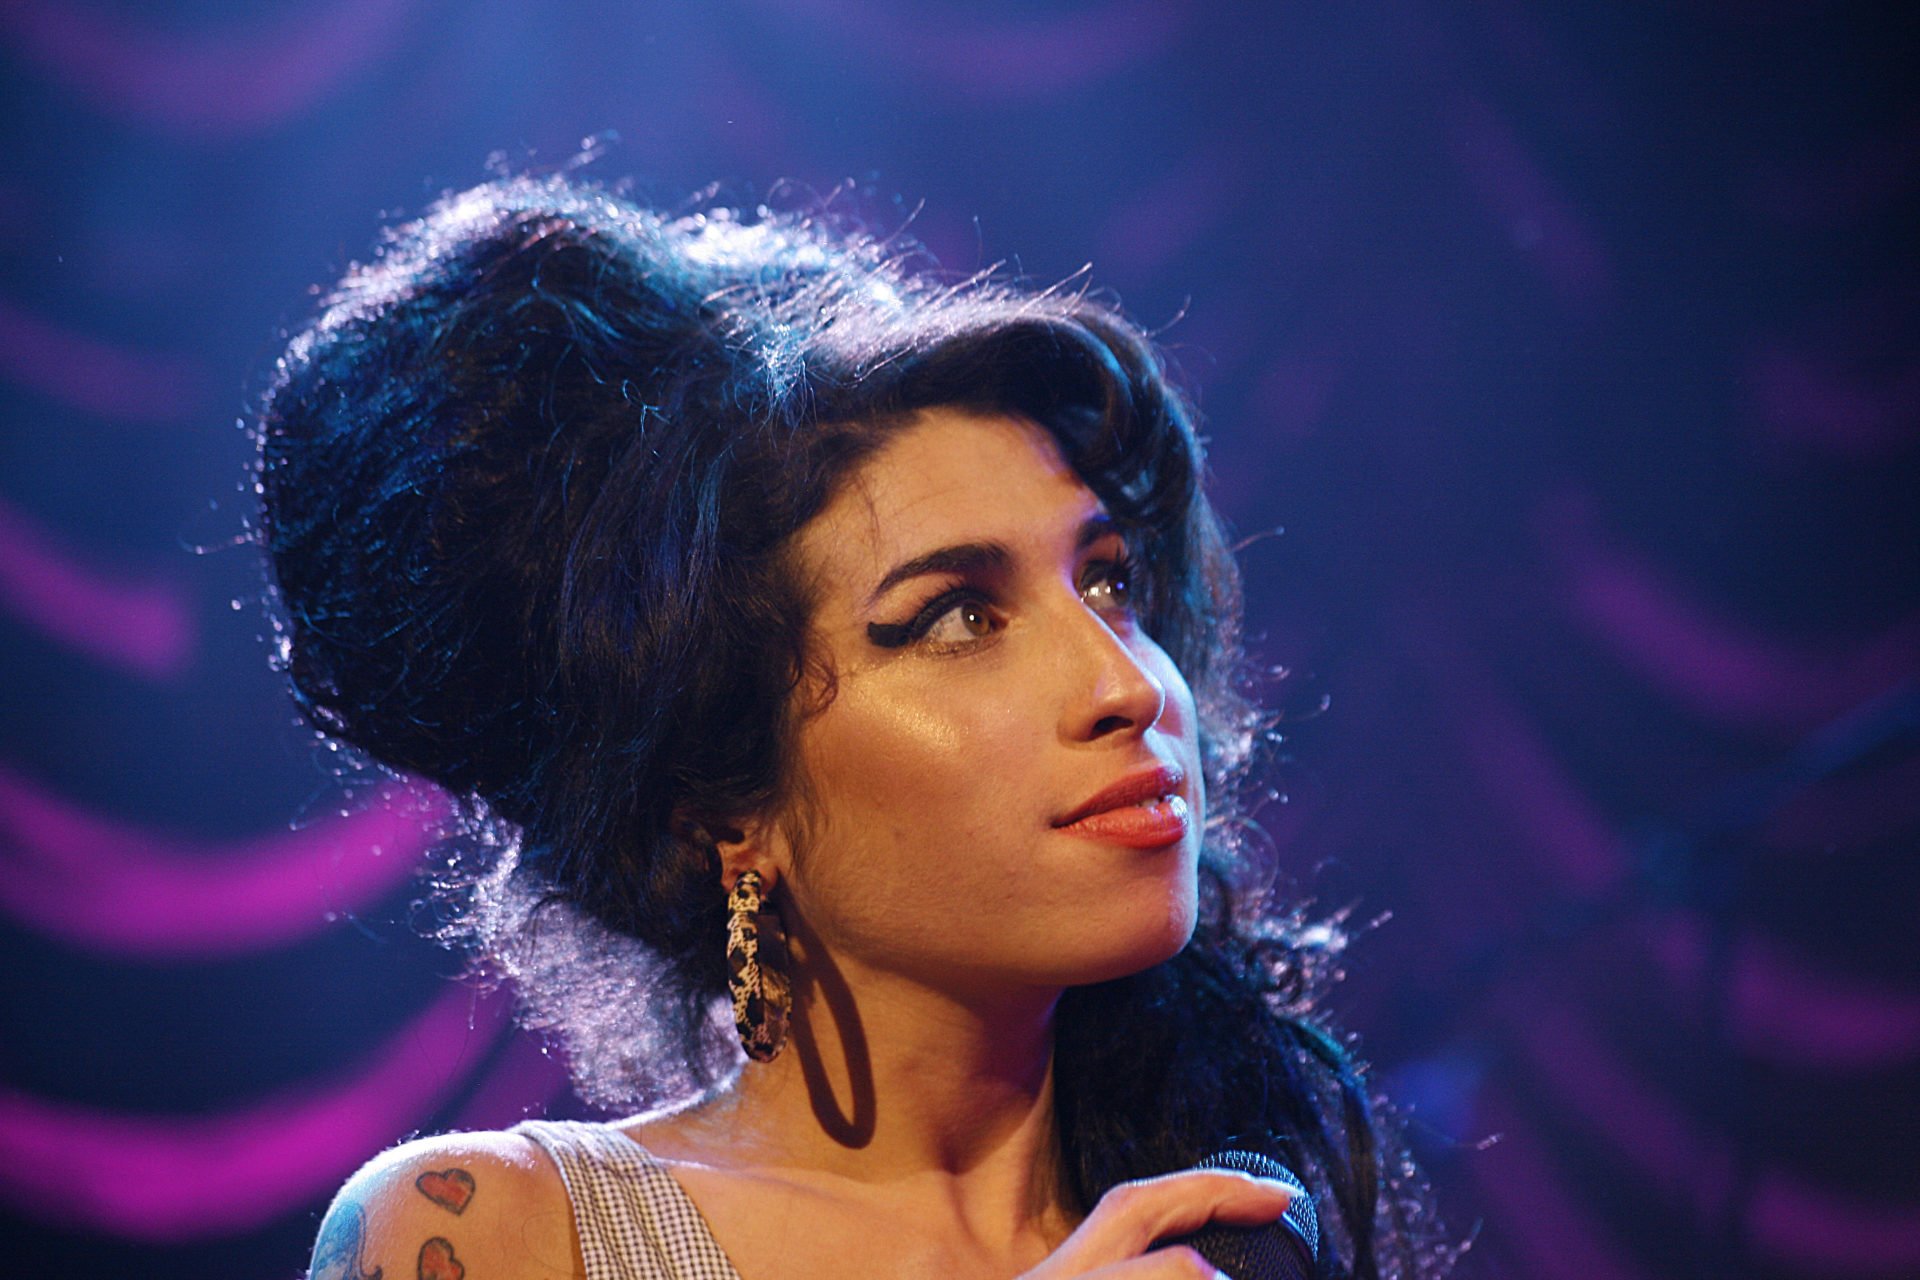 Amy Winehouse joined tragic 27 Club when she died at height of fame